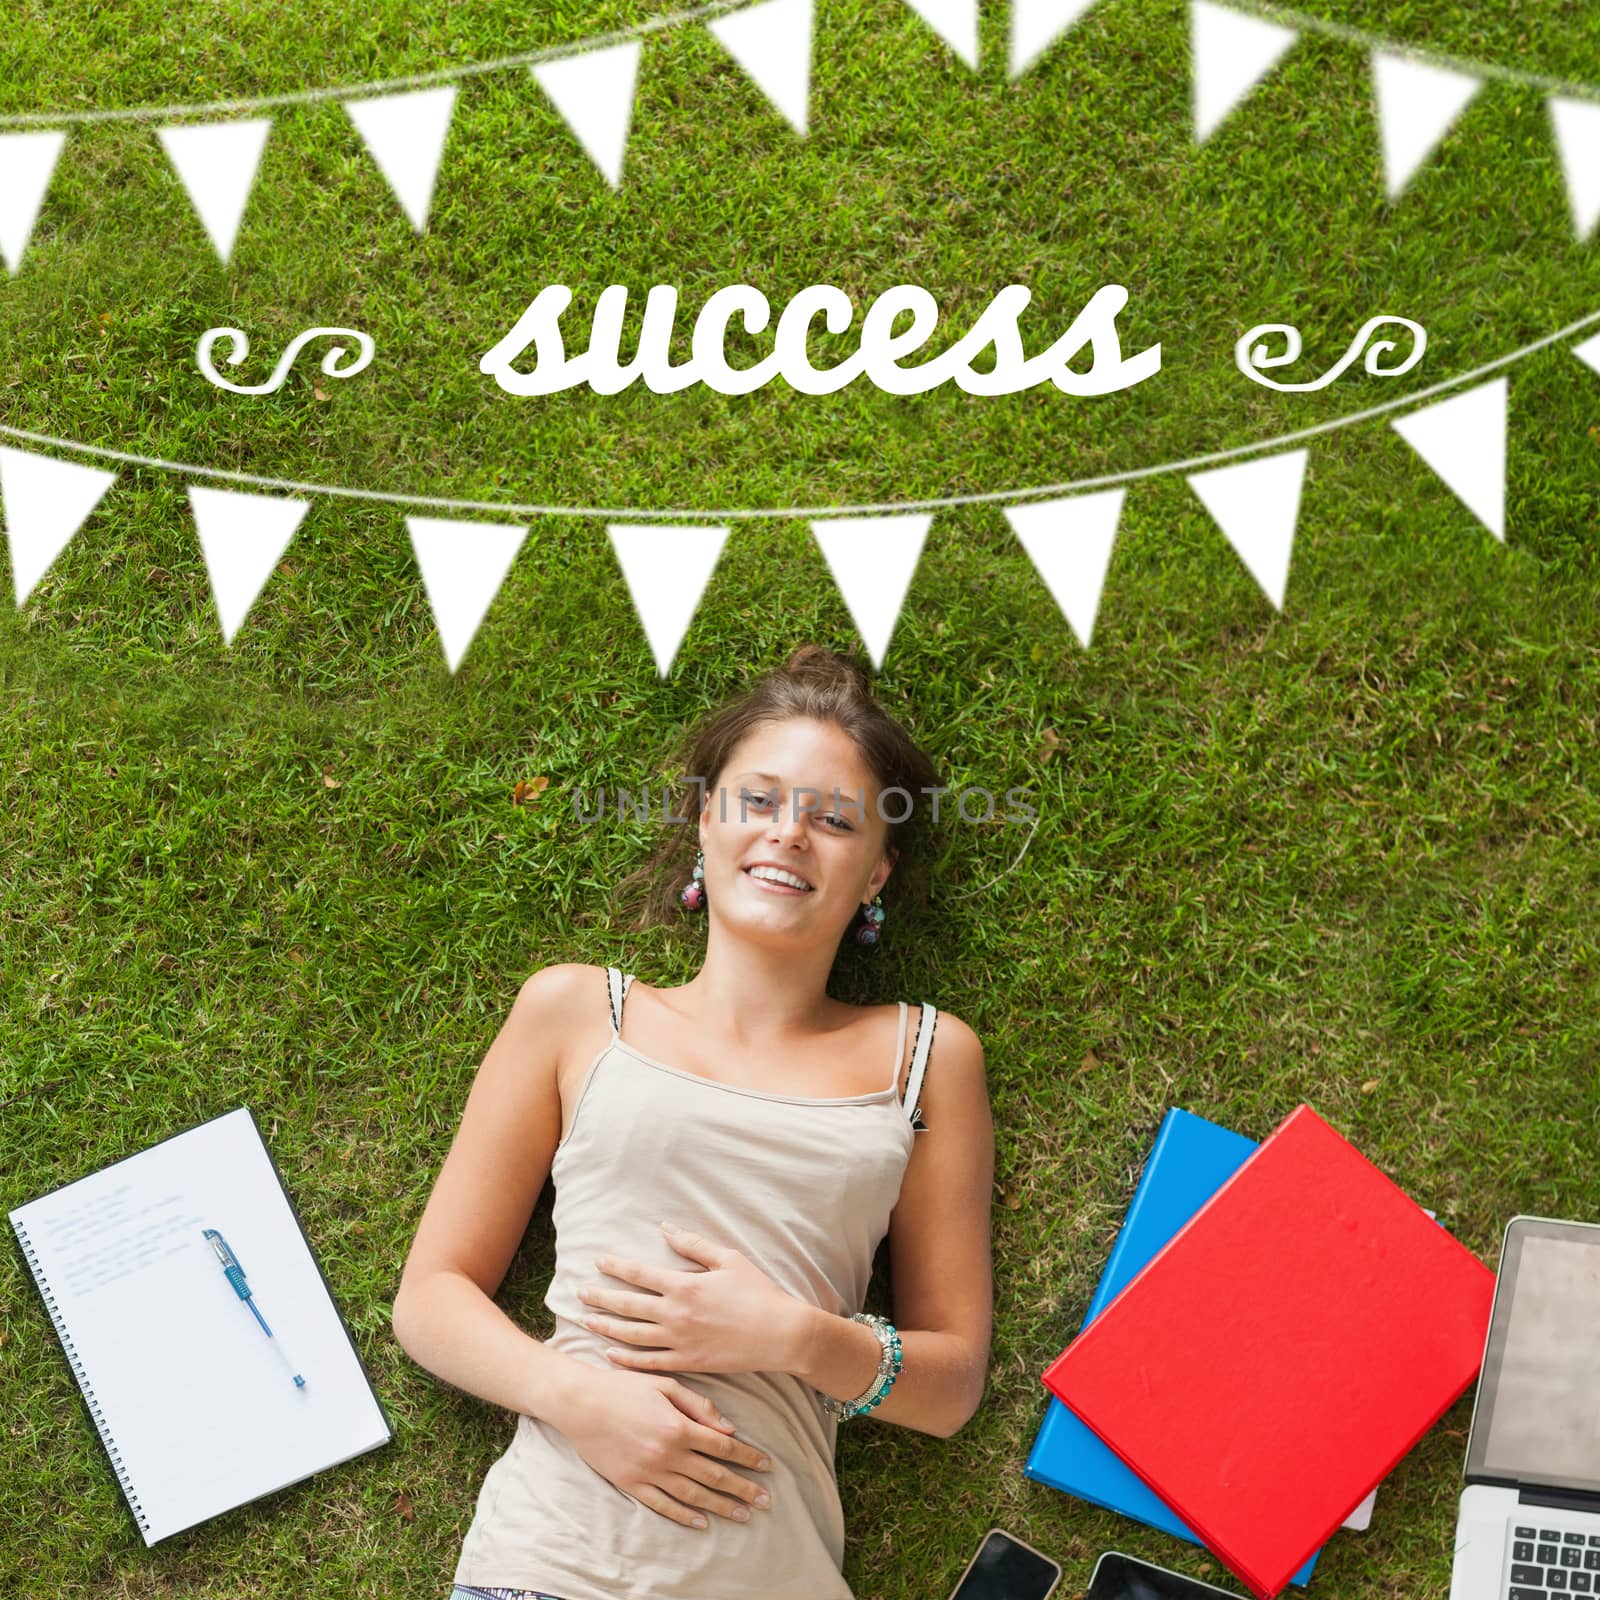 The word success and bunting against pretty student lying on grass